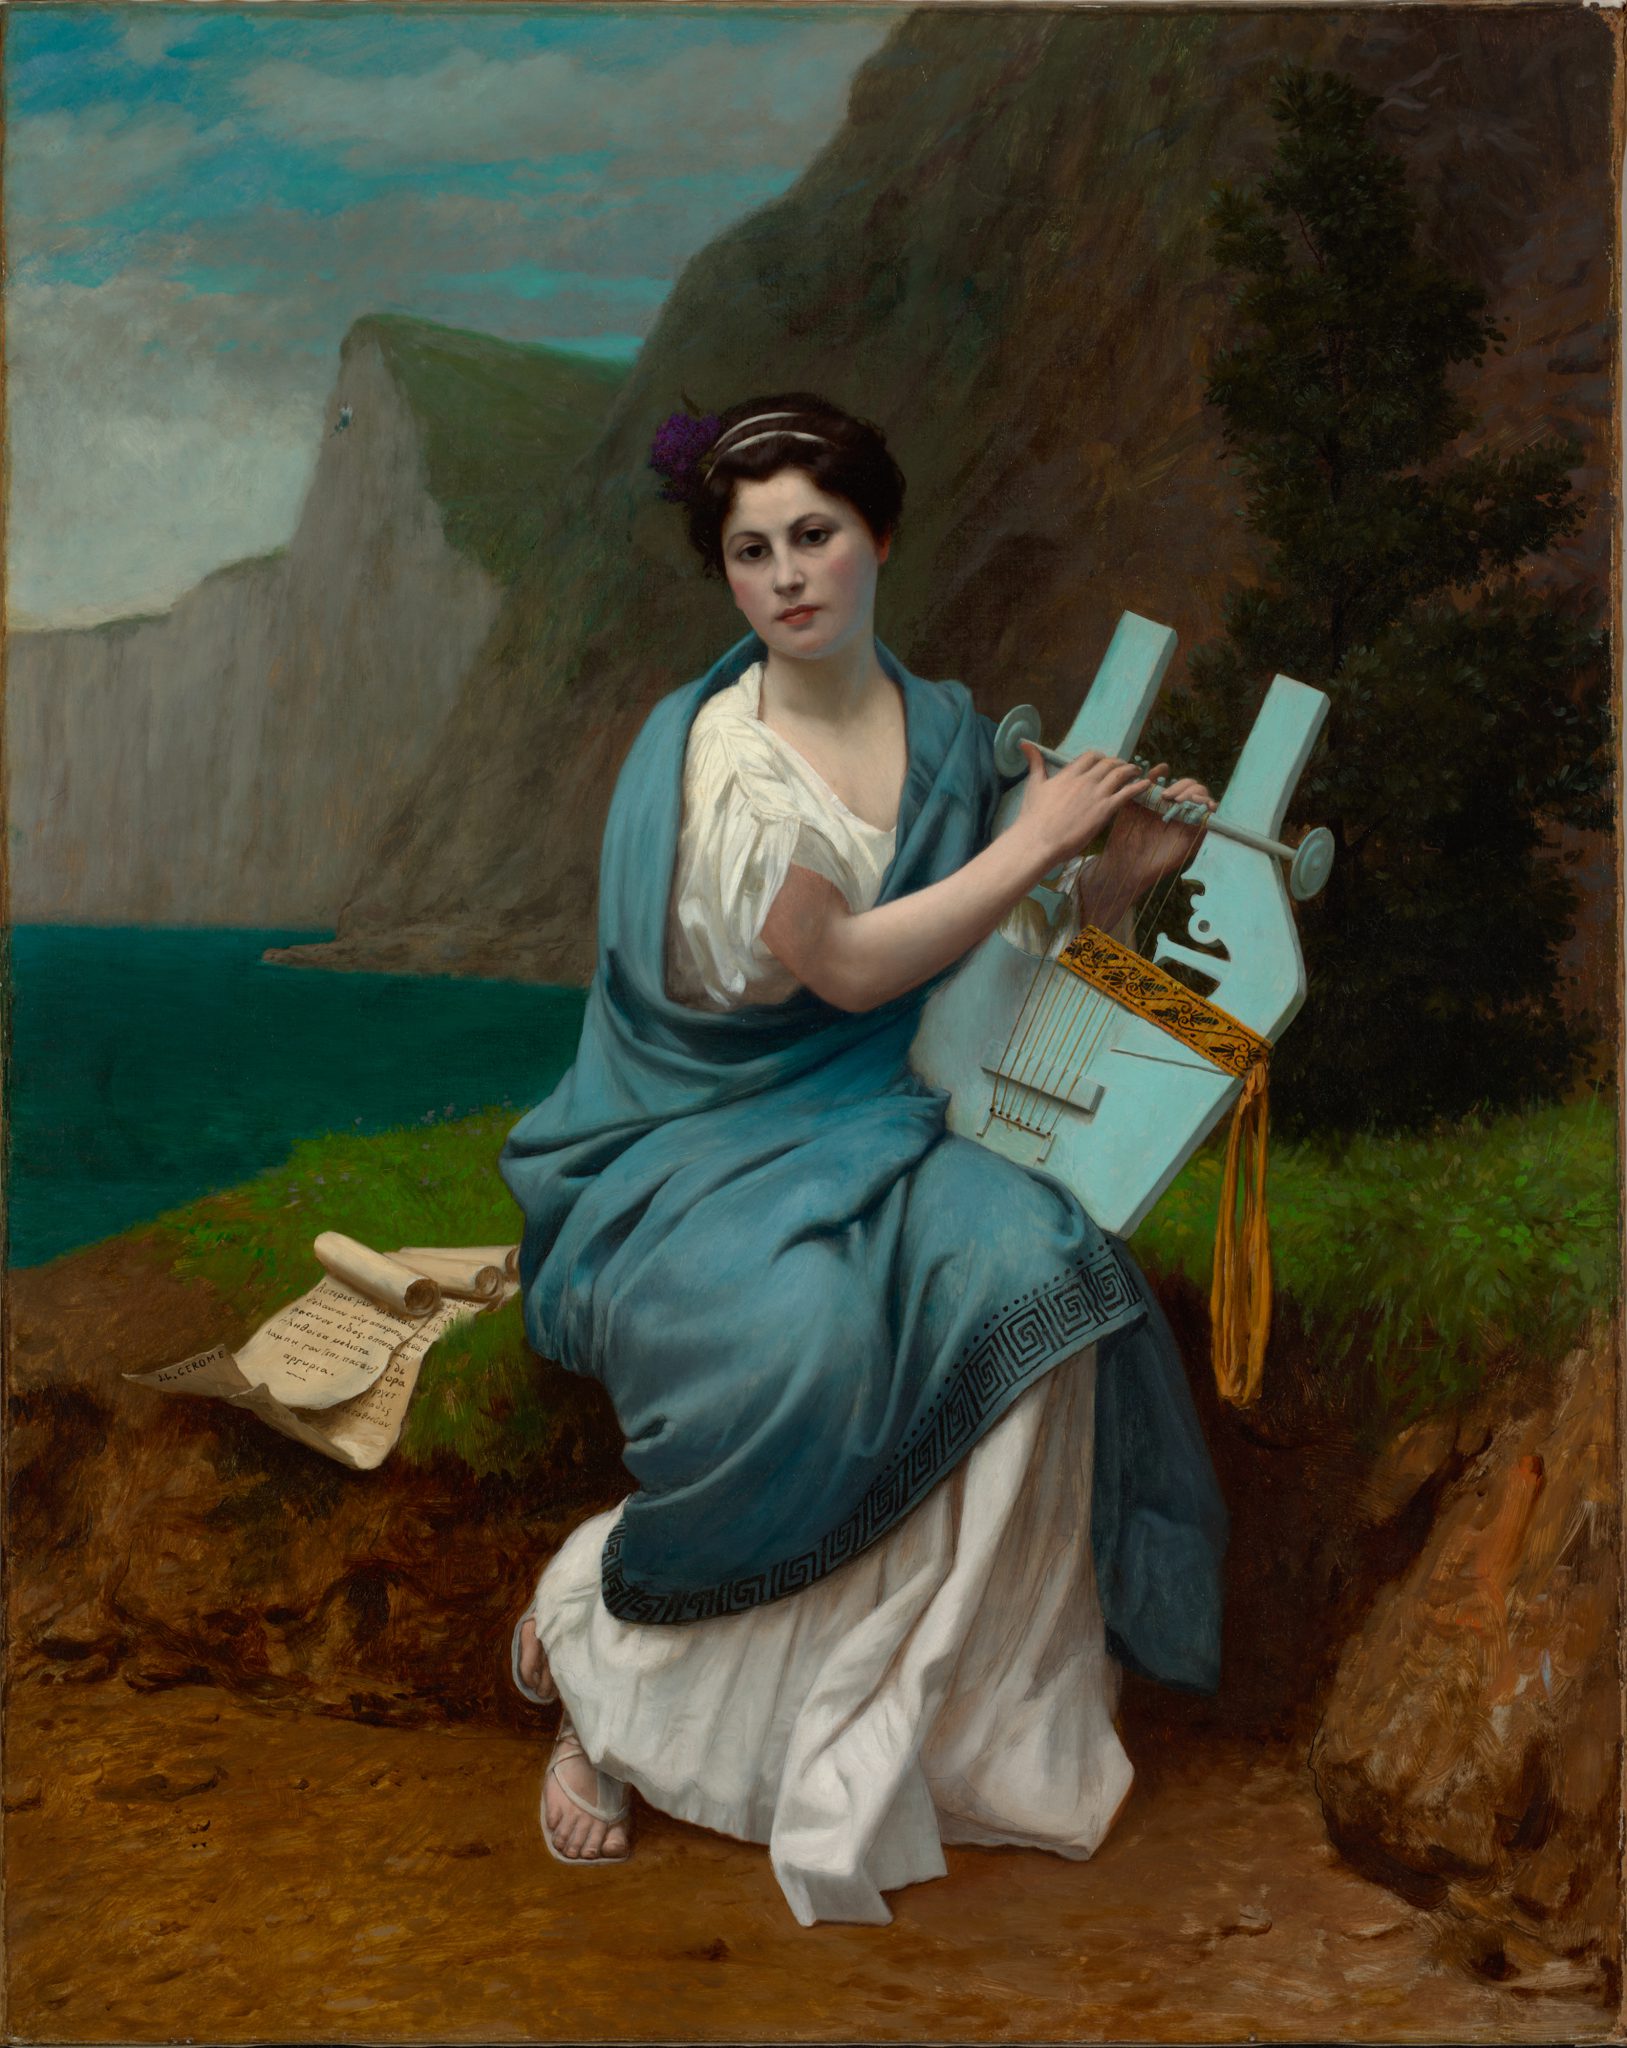 Painting of a woman with auburn hair and wearing a cerulean blue toga sits by the water and plays a lyre. Oceanside cliffs decorate the background.